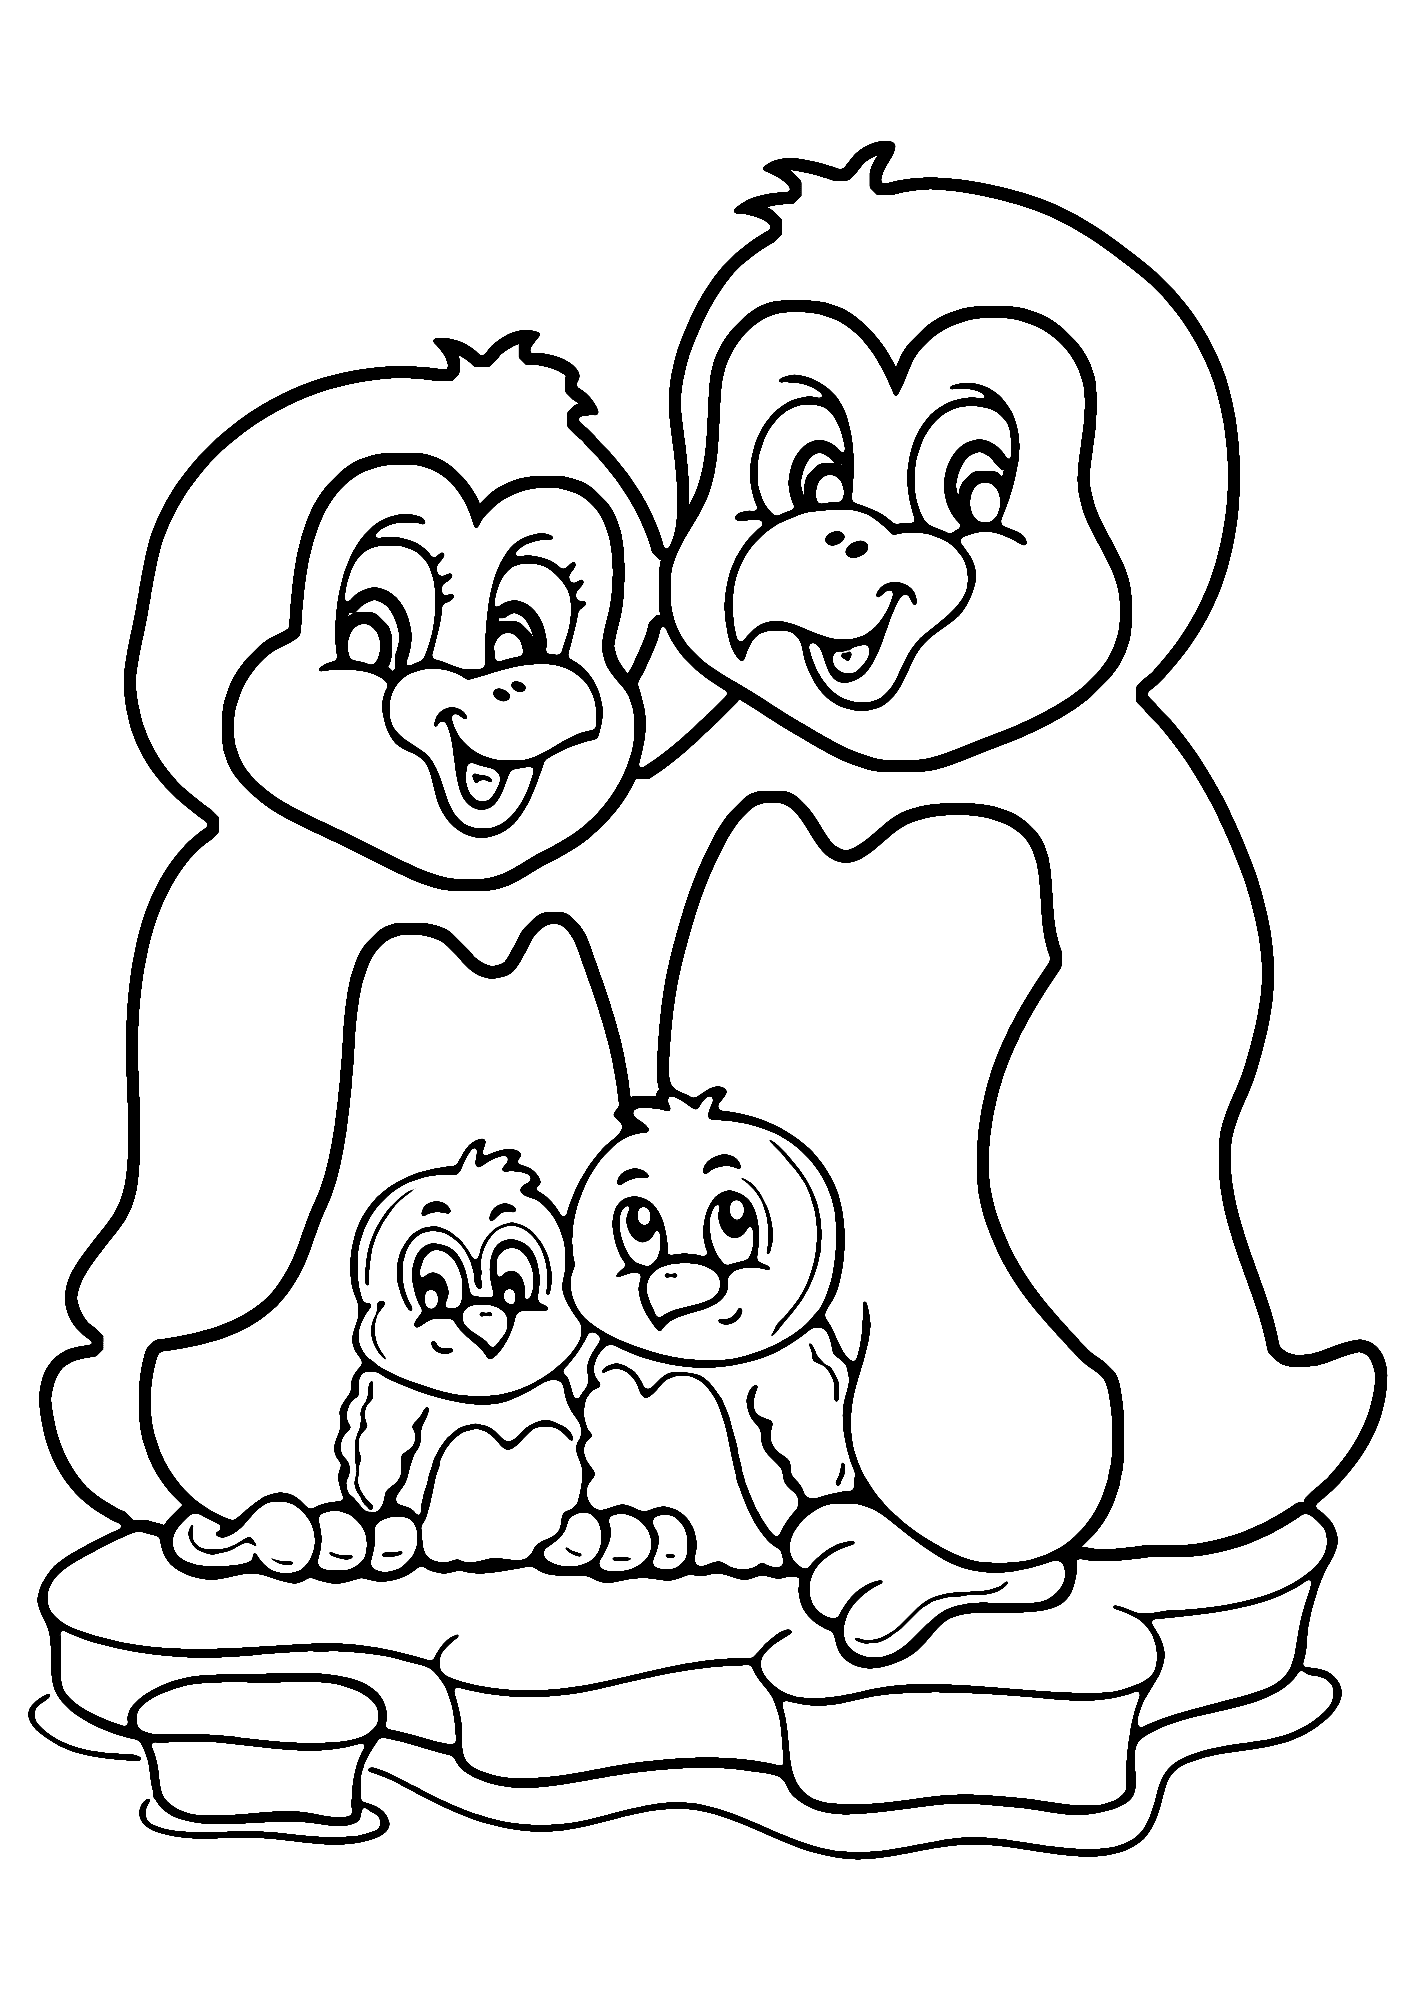 Penguin Family For Children Coloring Page